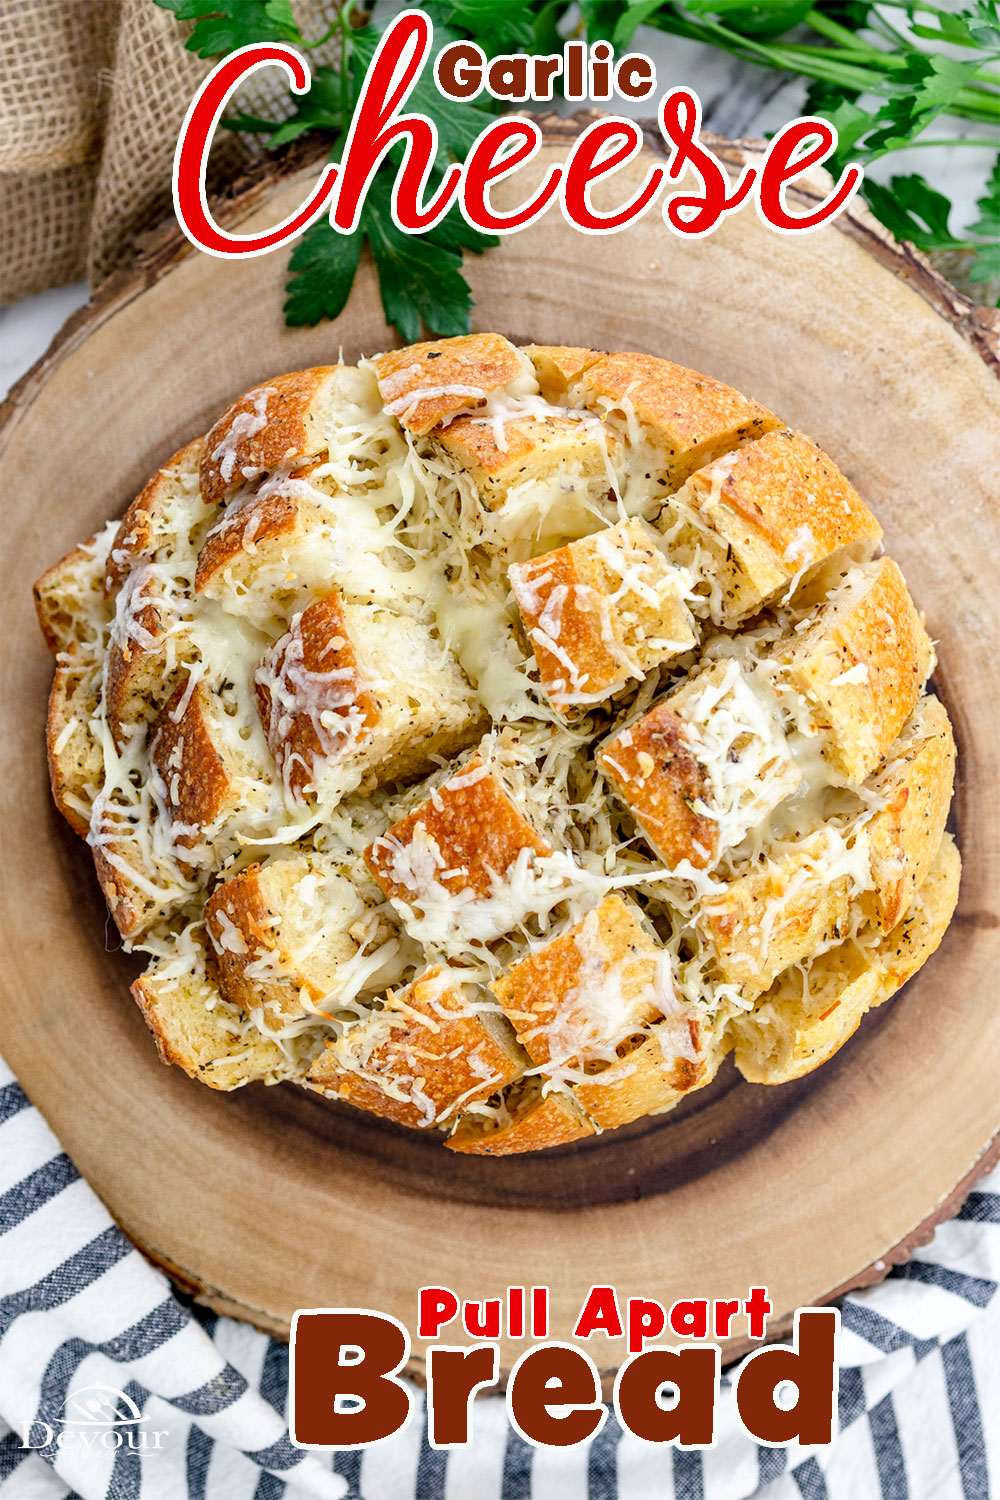 Cheesy Pull Apart Bread is one of my favorite appetizers. With a great presentation, it literally oozes cheesy goodness to wow your dinner guests! Made with garlic, Italian herbs, and three types of cheese, this dish is delicious and comforting!